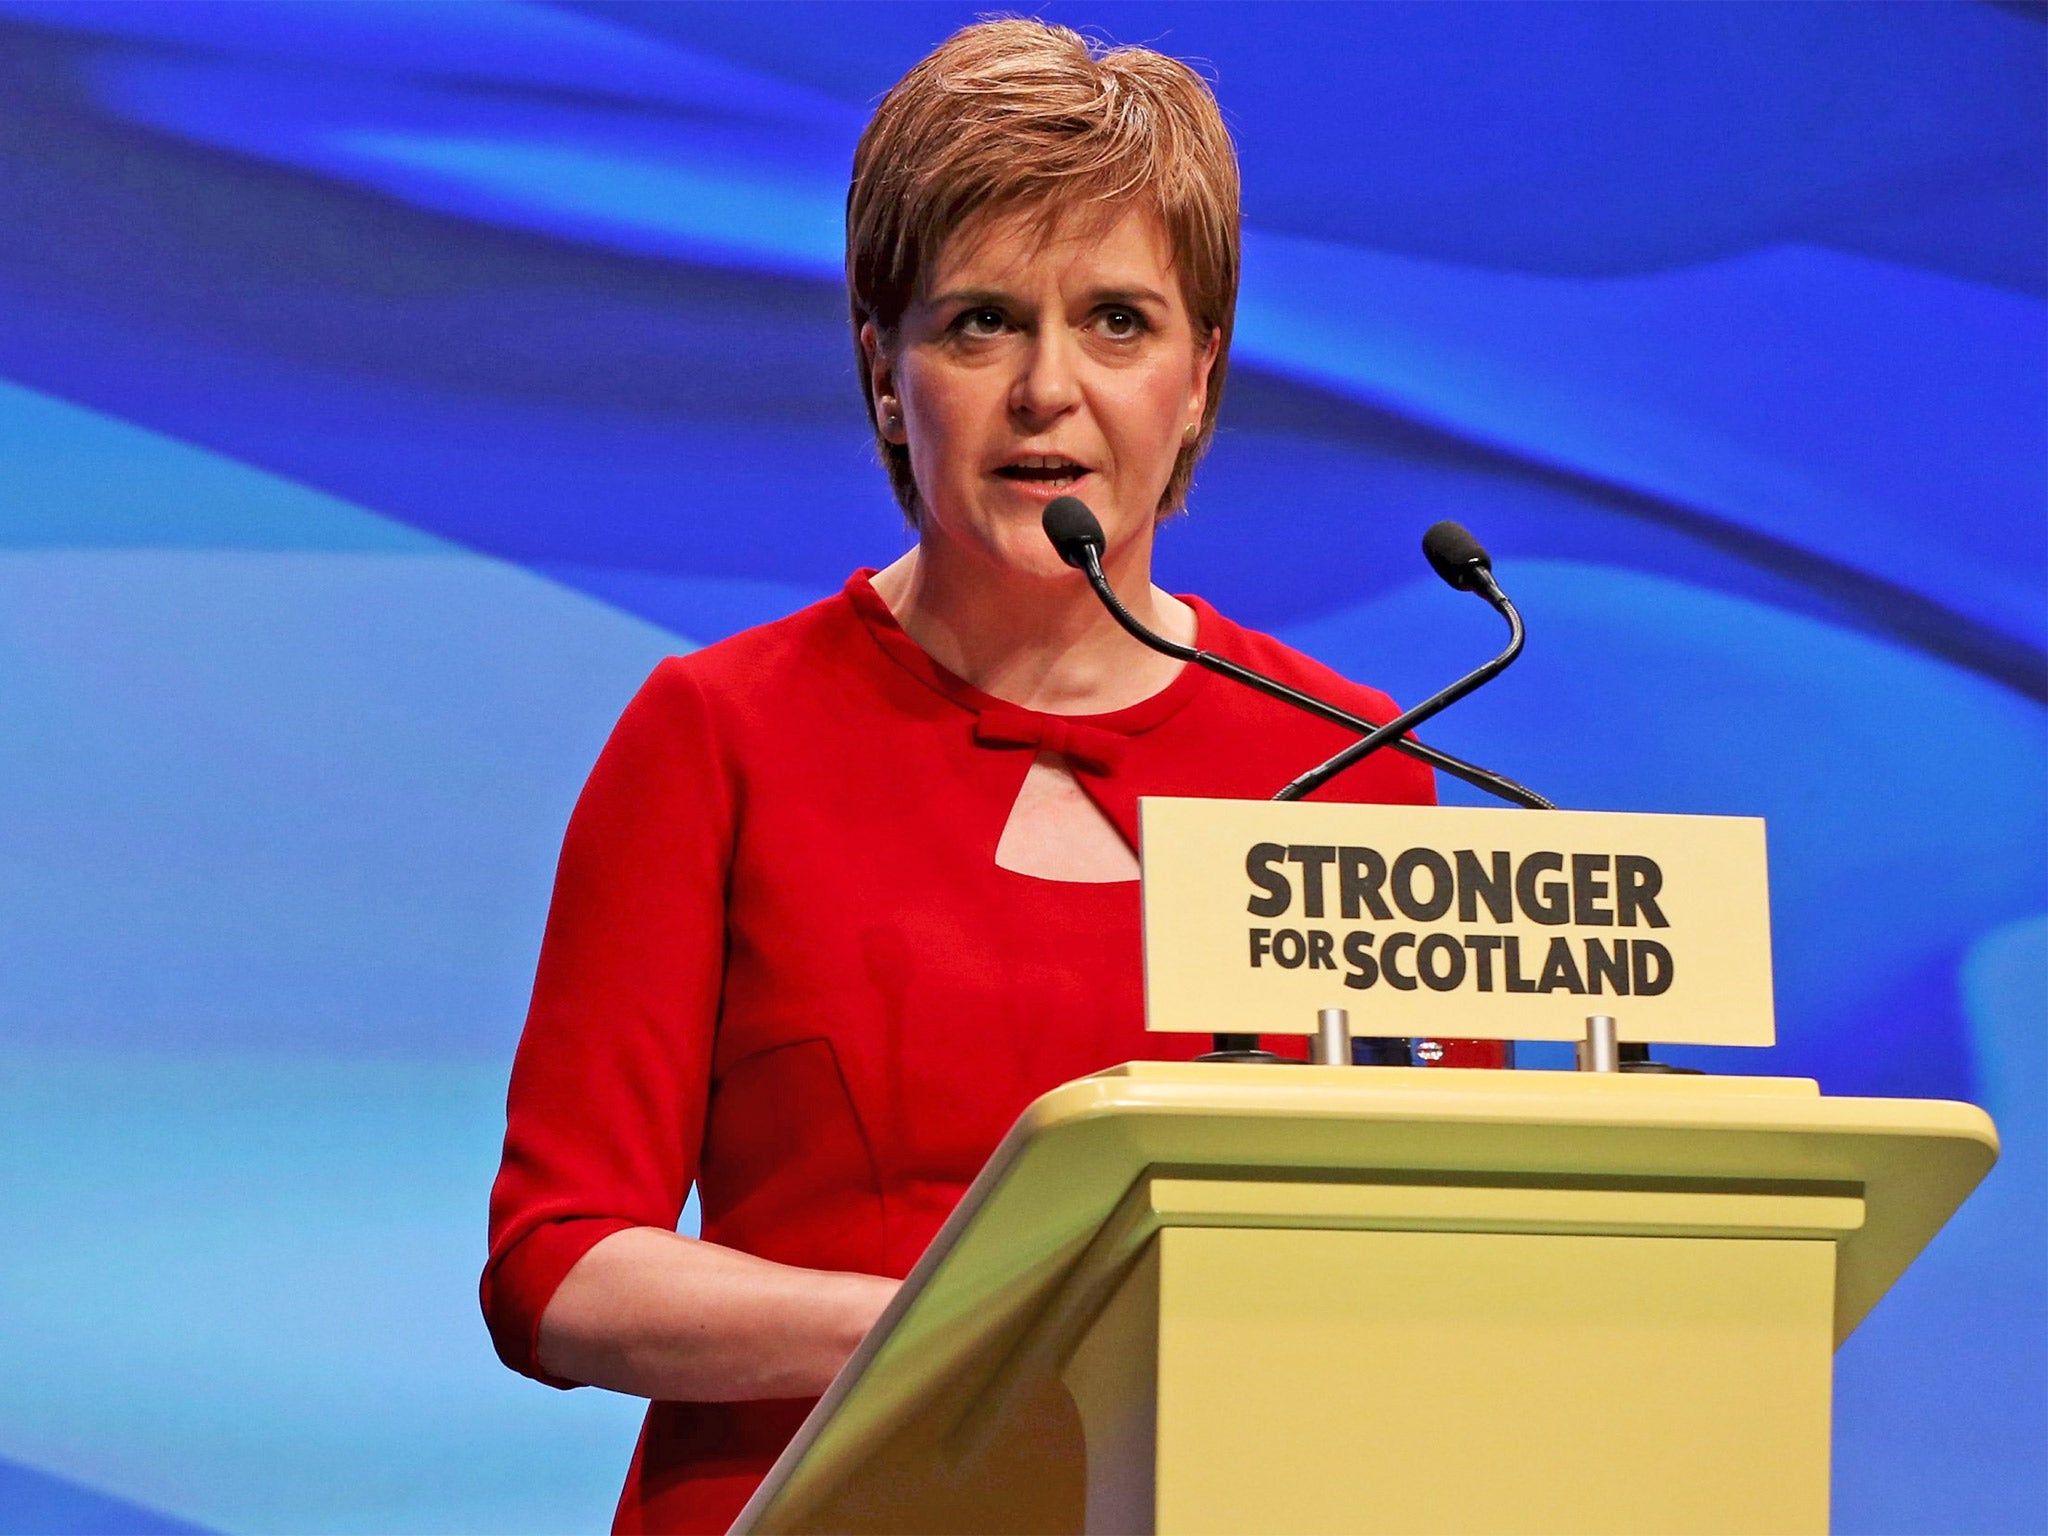 Nicola Sturgeon at the SN P conference last week, where she said the party should be judged ‘on our record’ in government